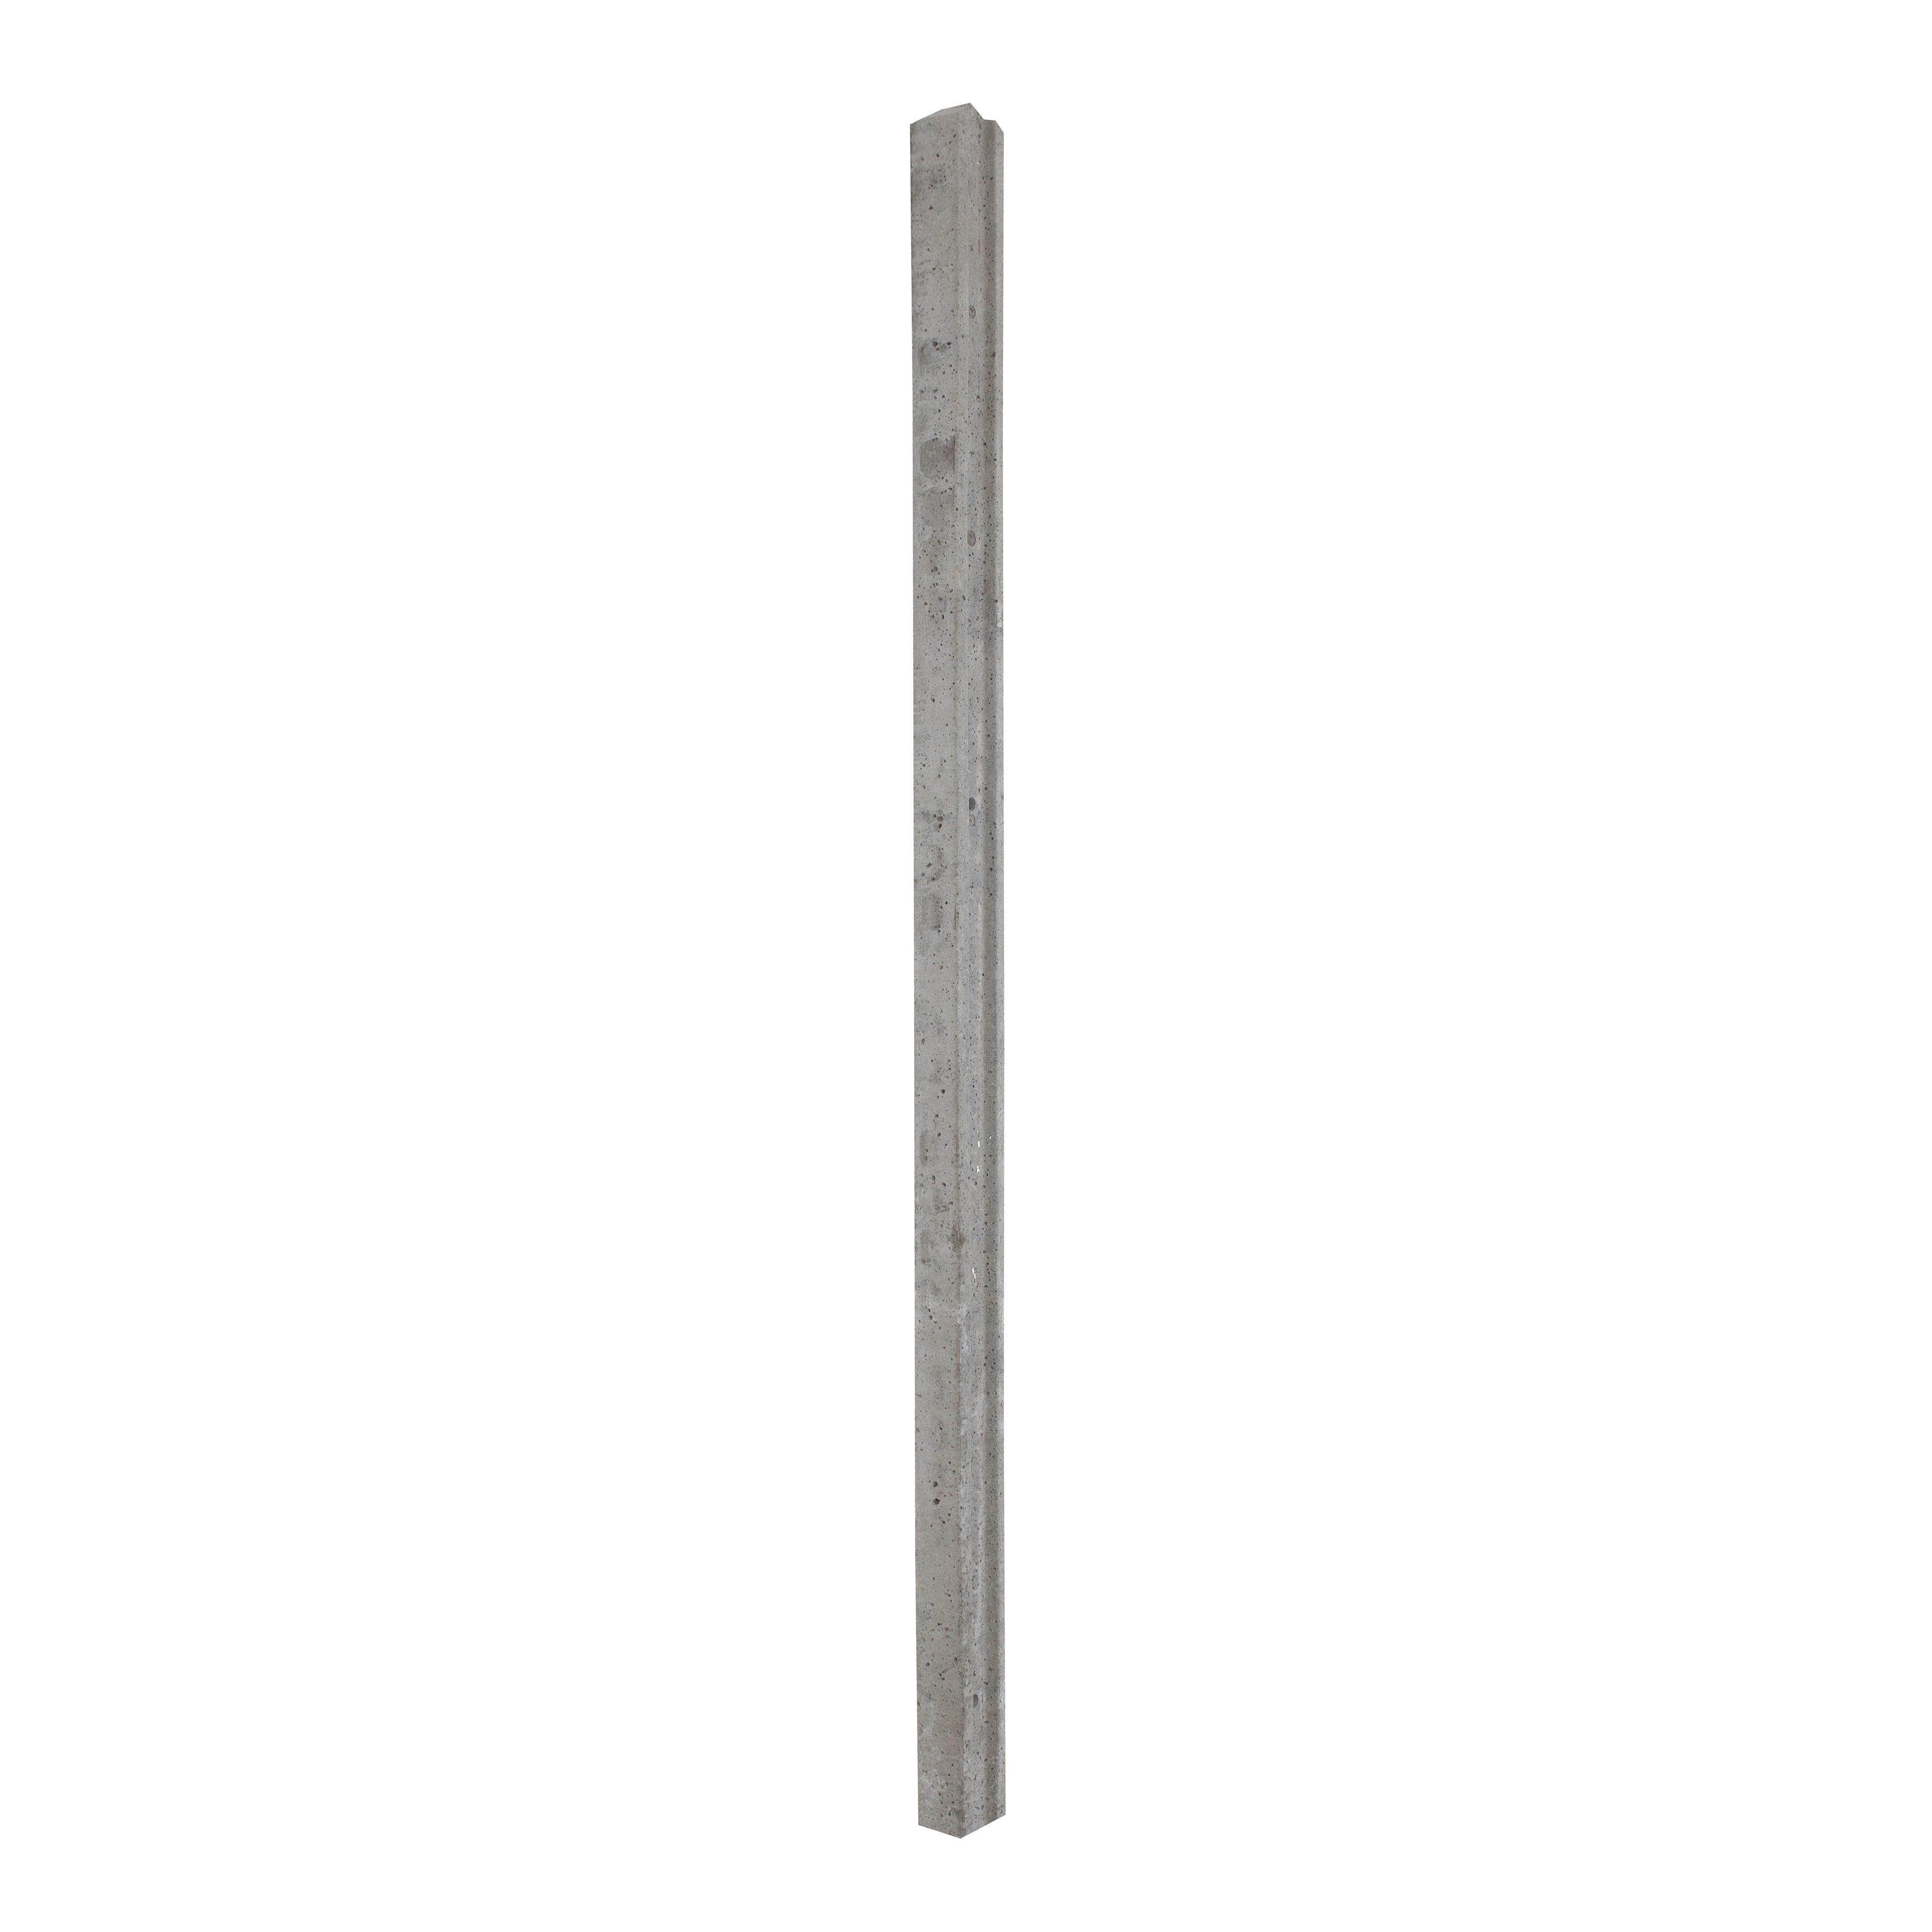 Grey Square Concrete Fence post (H)2.36m (W)85mm, Pack of 5